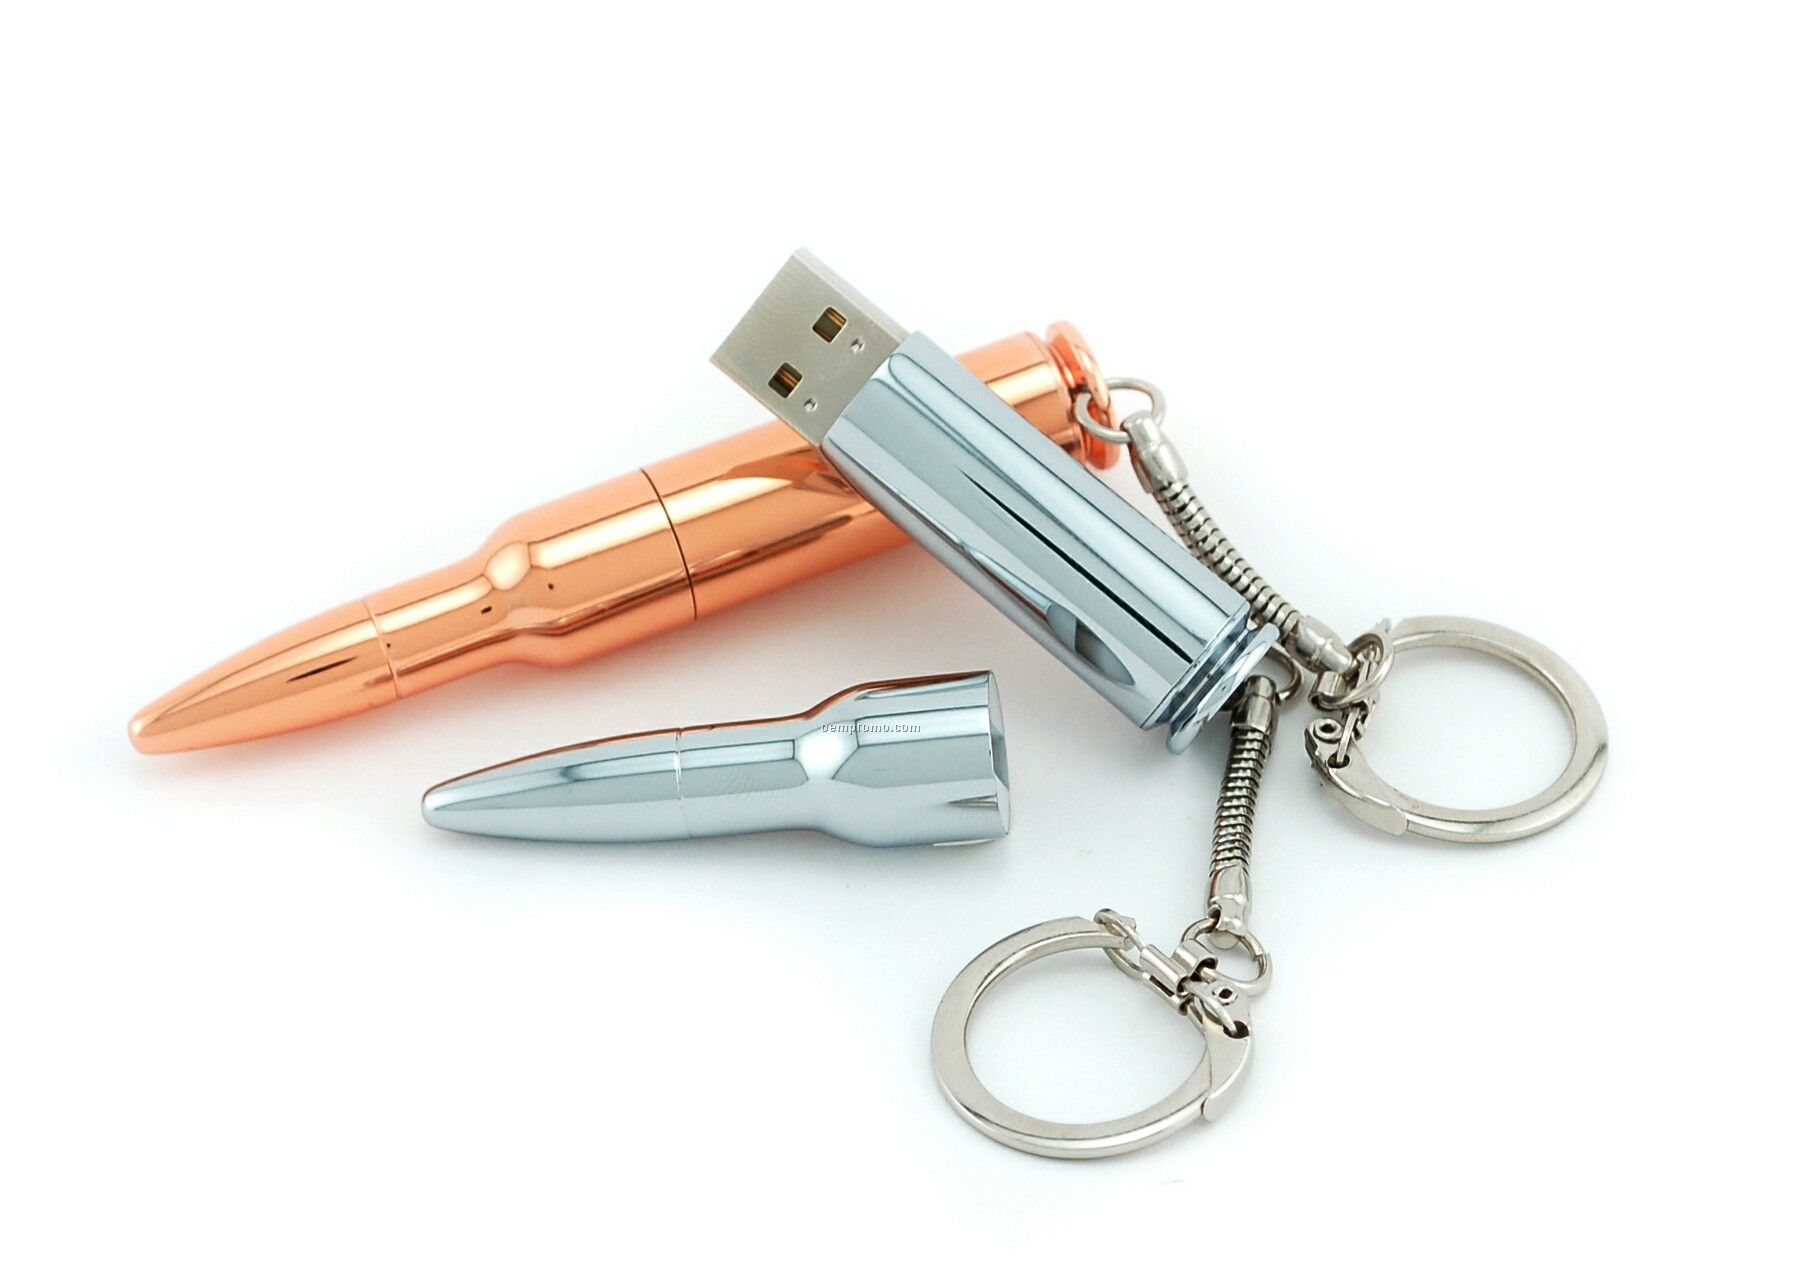 8 Gb Specialty 200 Series USB Drive - "30-06" Bullet